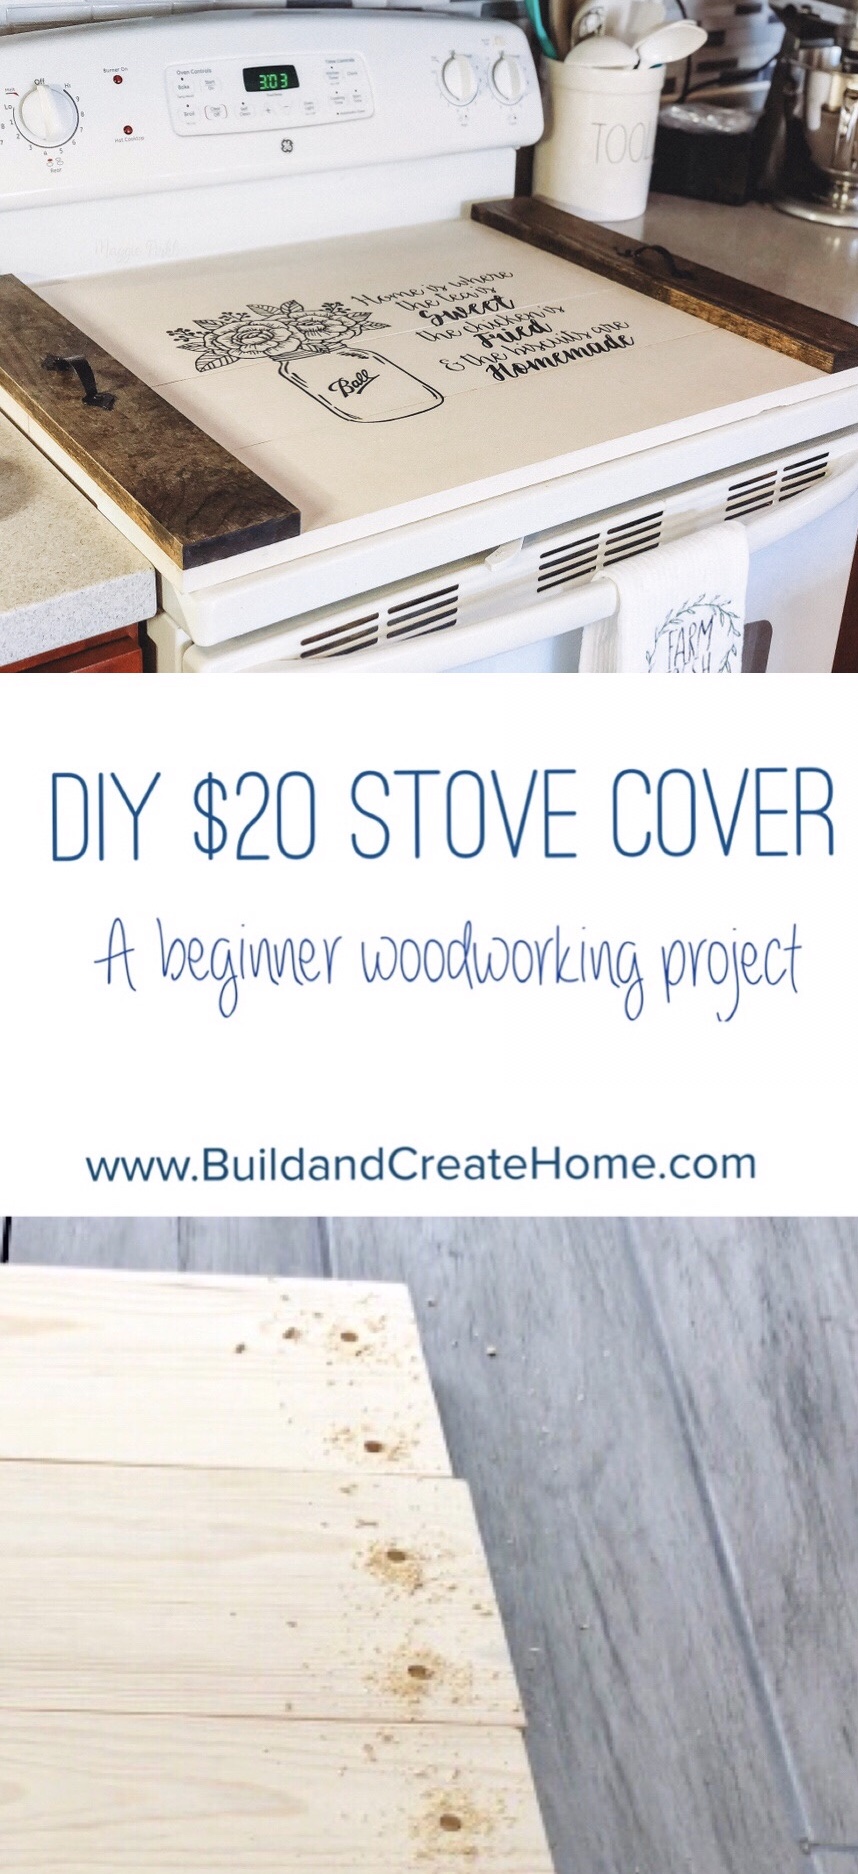 How to make a DIY Stove Cover / Noodle Board for your kitchen